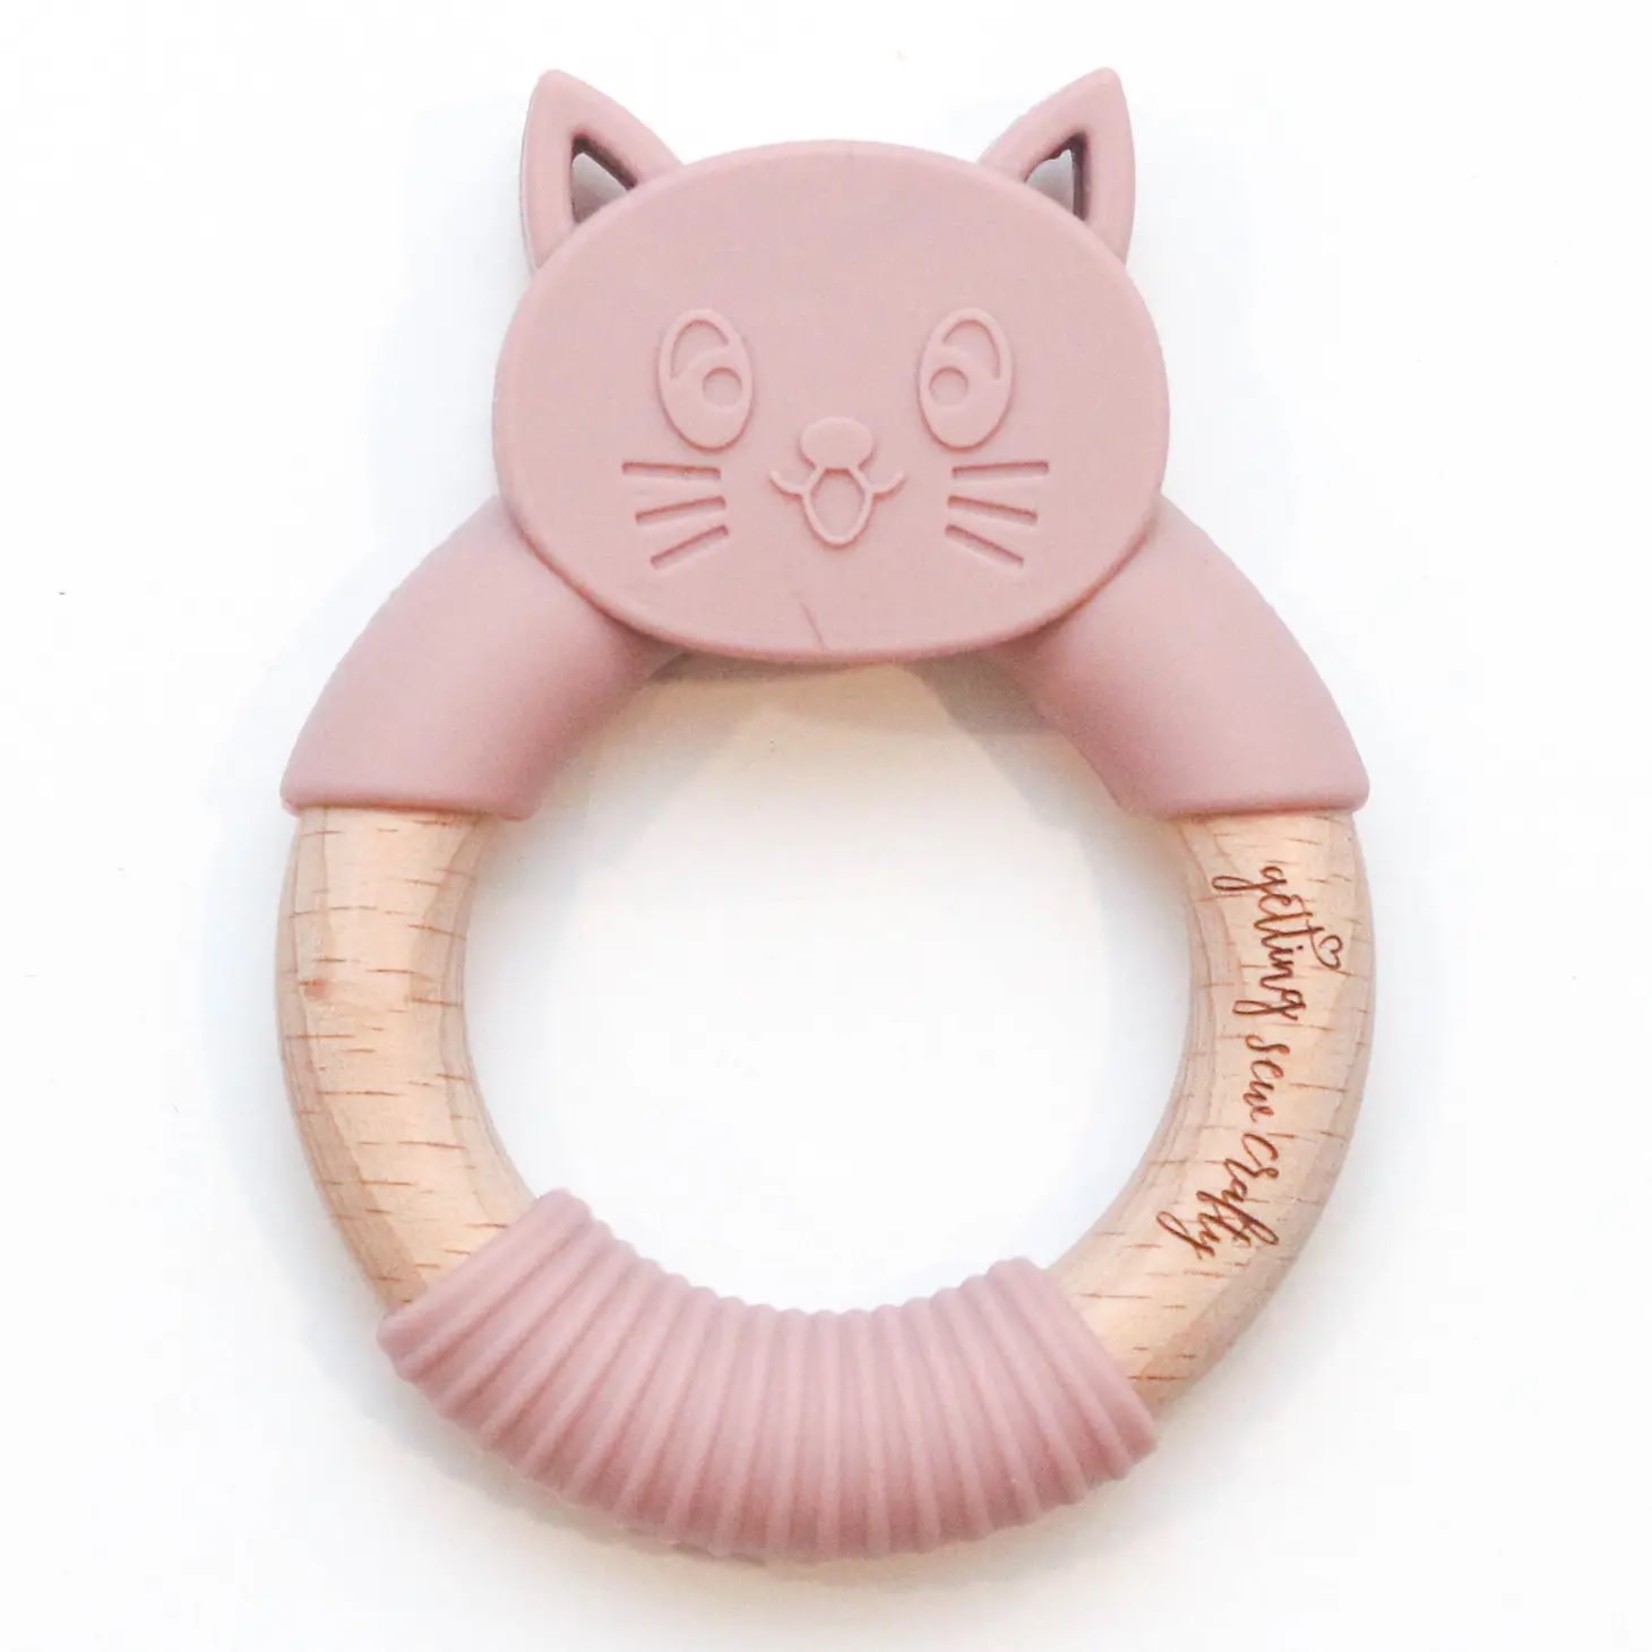 Silicone + Wood Ring Teether - Pink Kitty